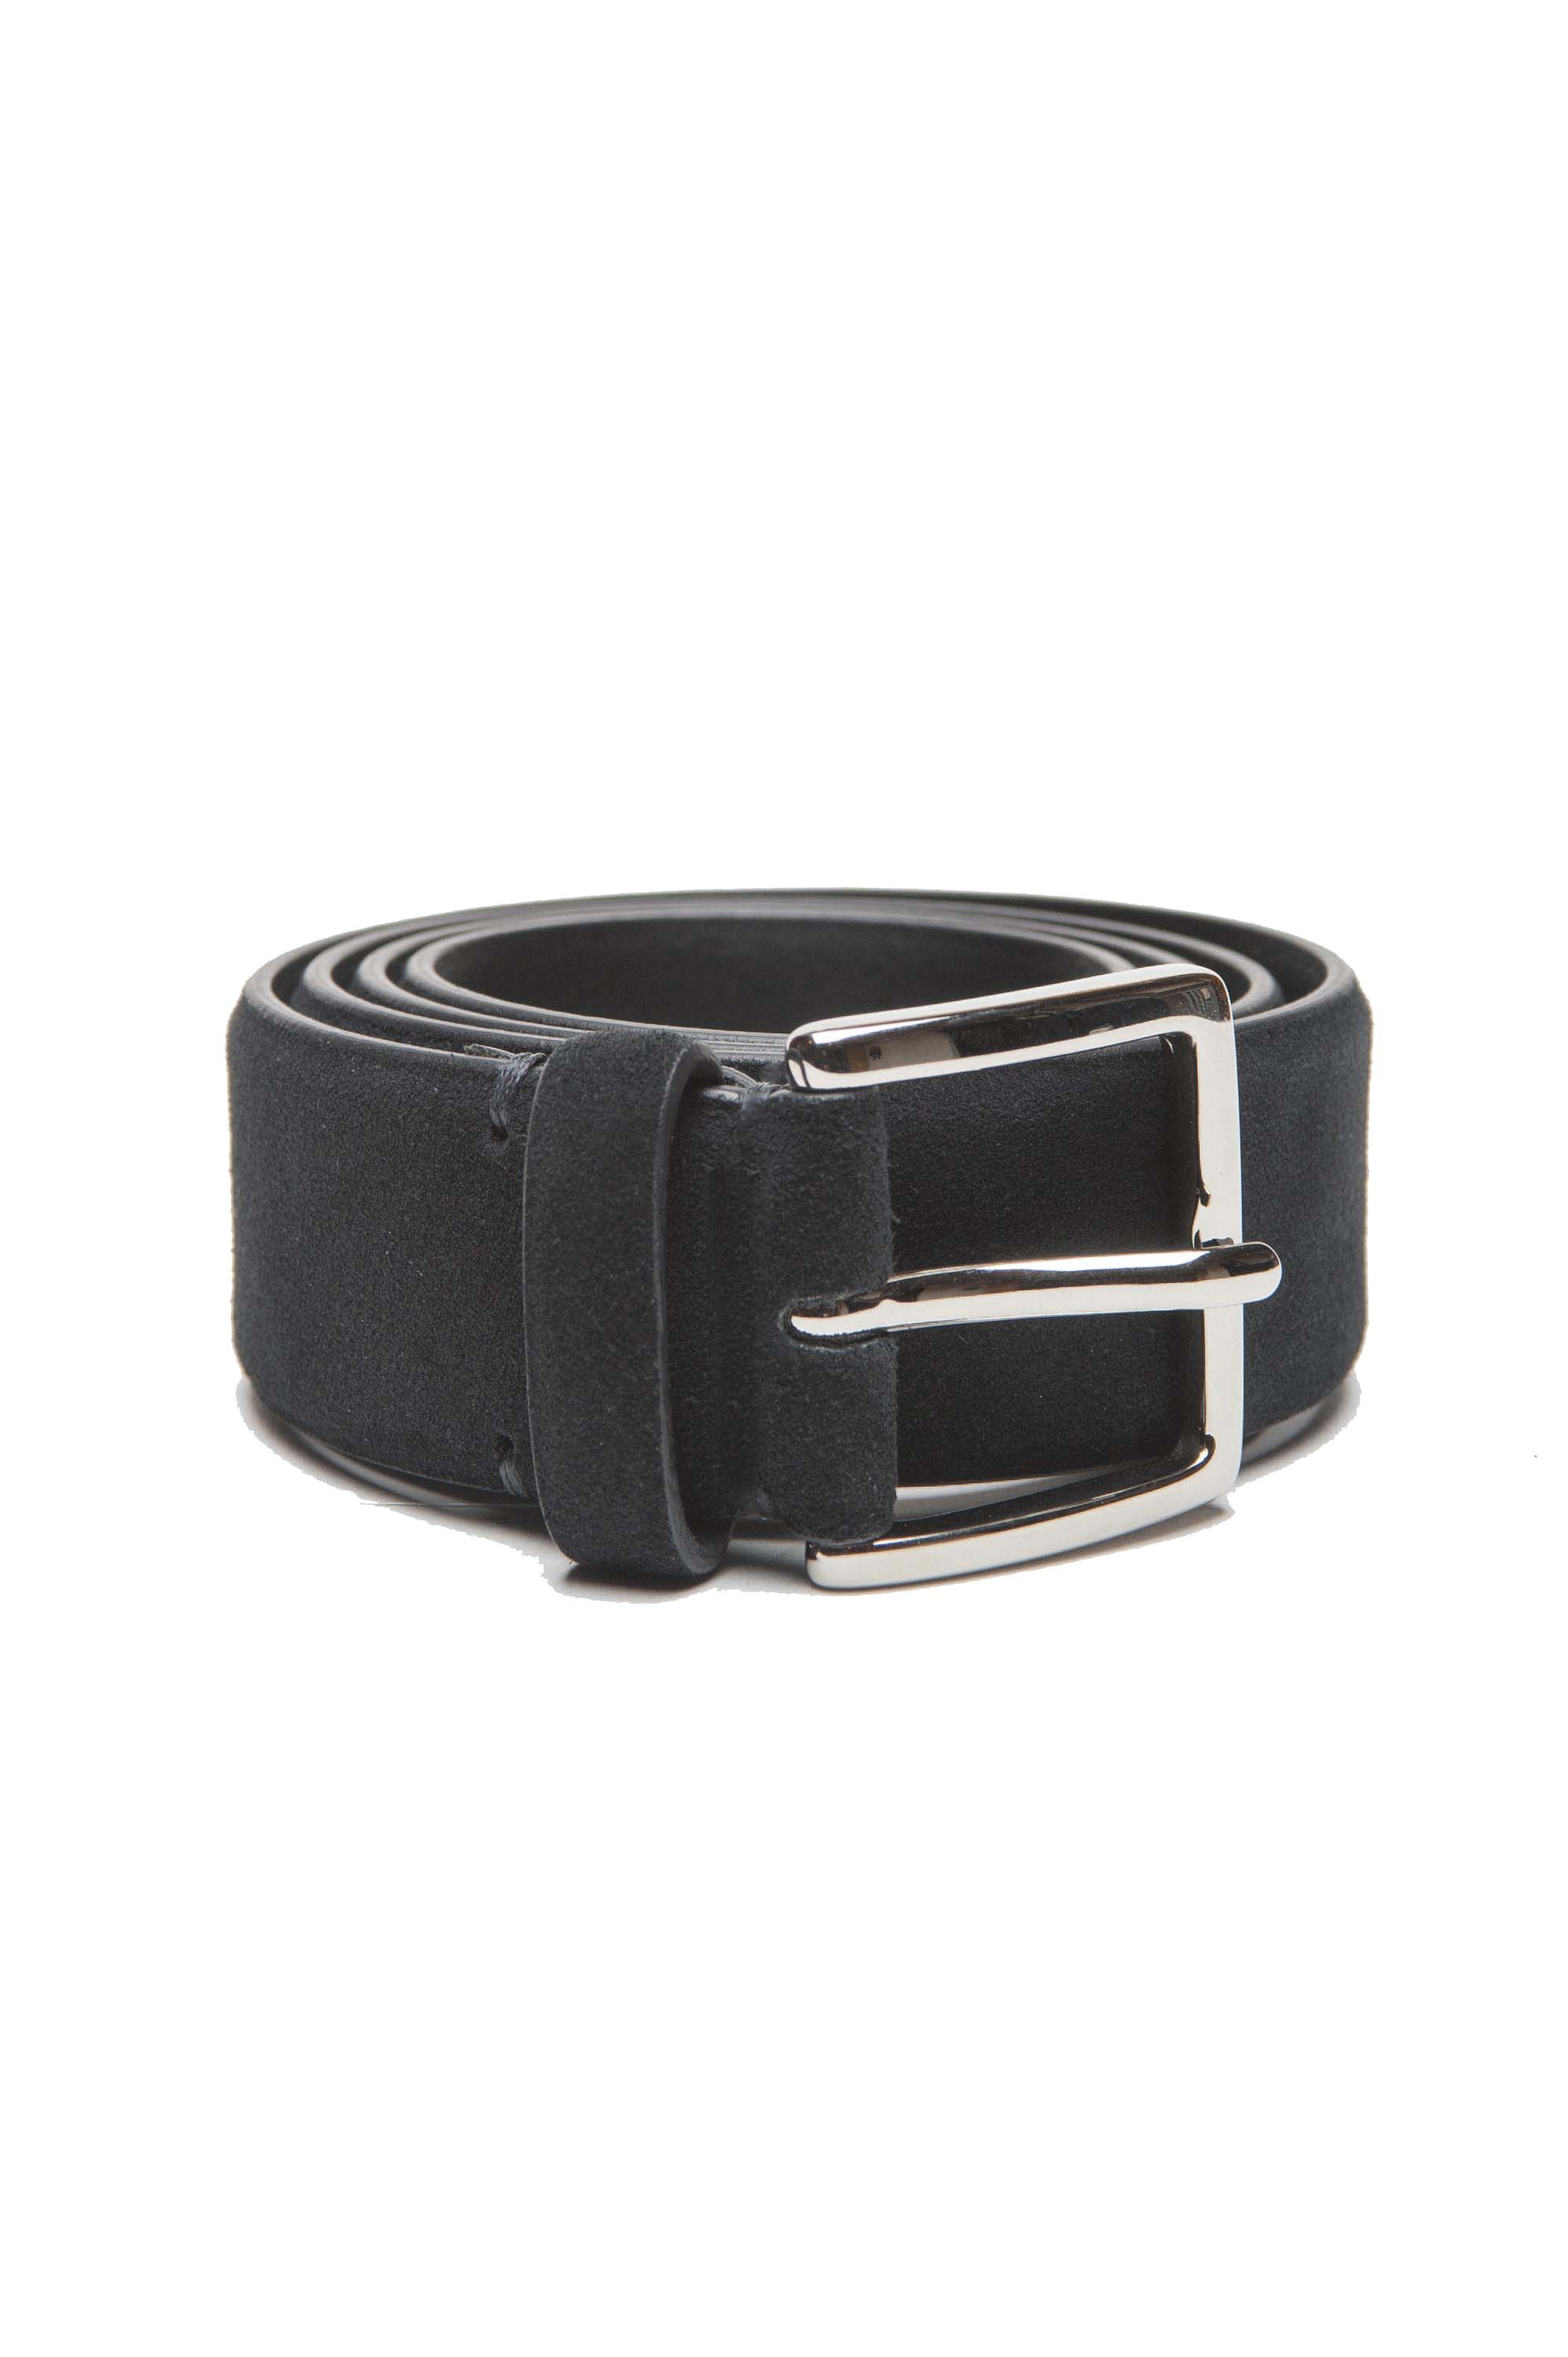 SBU 04816_23AW Classic belt in blue suede leather 1.4 inches 01